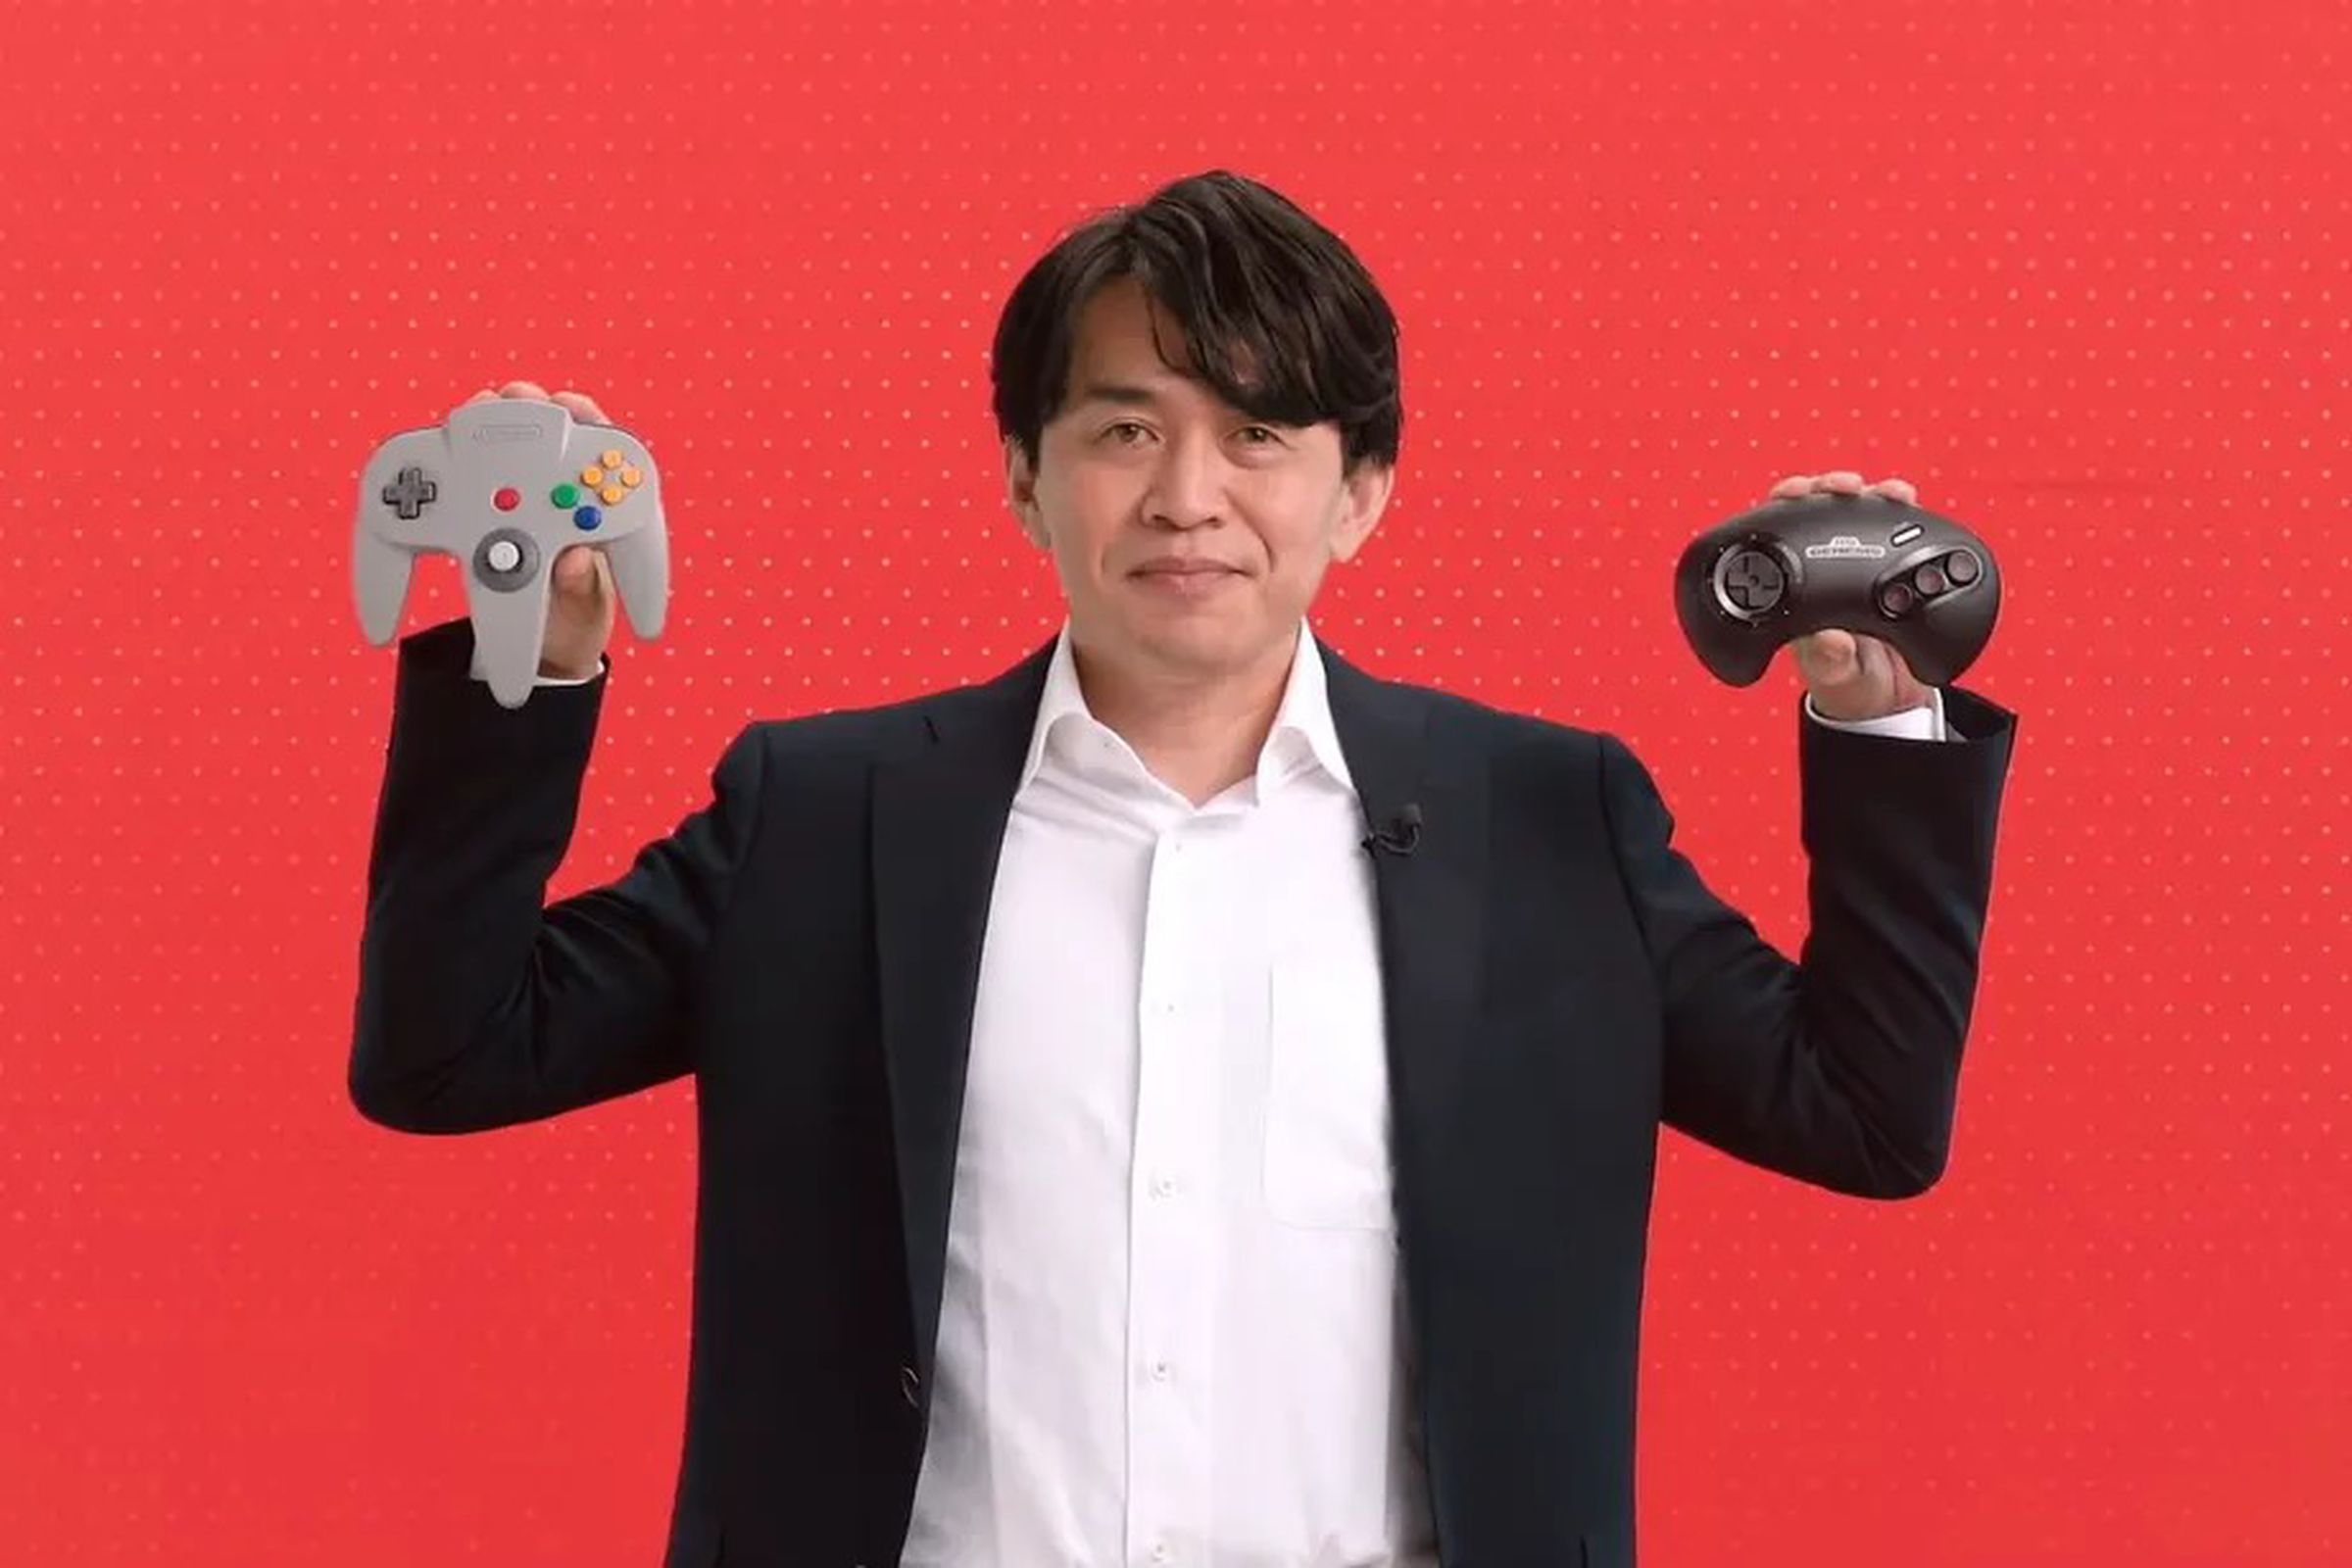 The release also includes Nintendo 64 and Sega Genesis controllers for Switch.